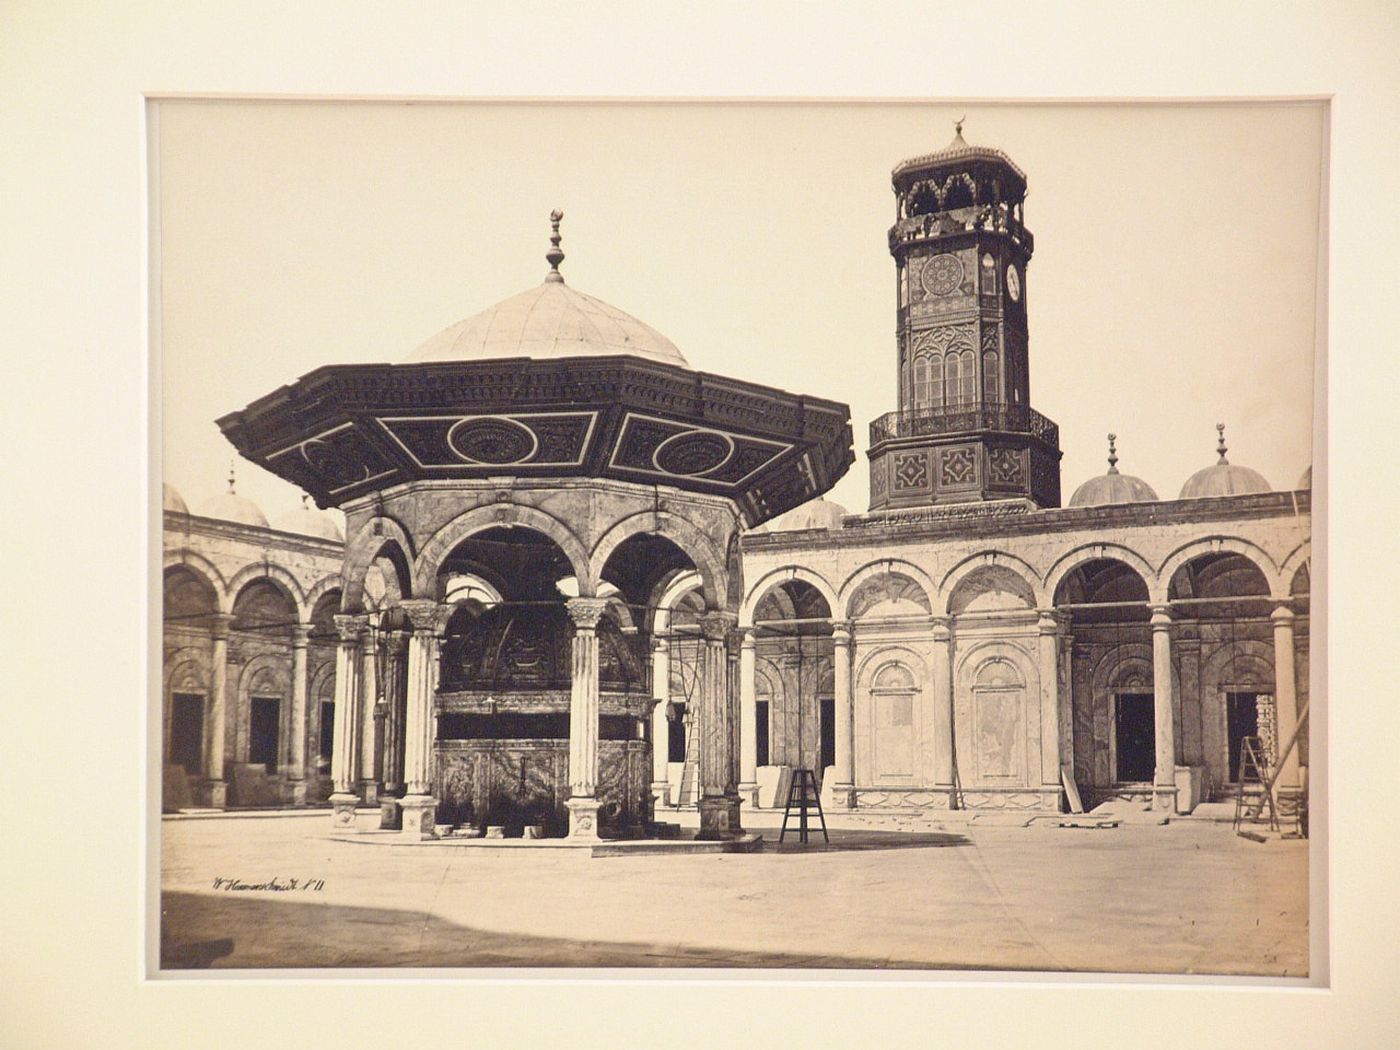 Fountain in courtyard of the Mohammad Ali Mosque, Cairo, Egypt